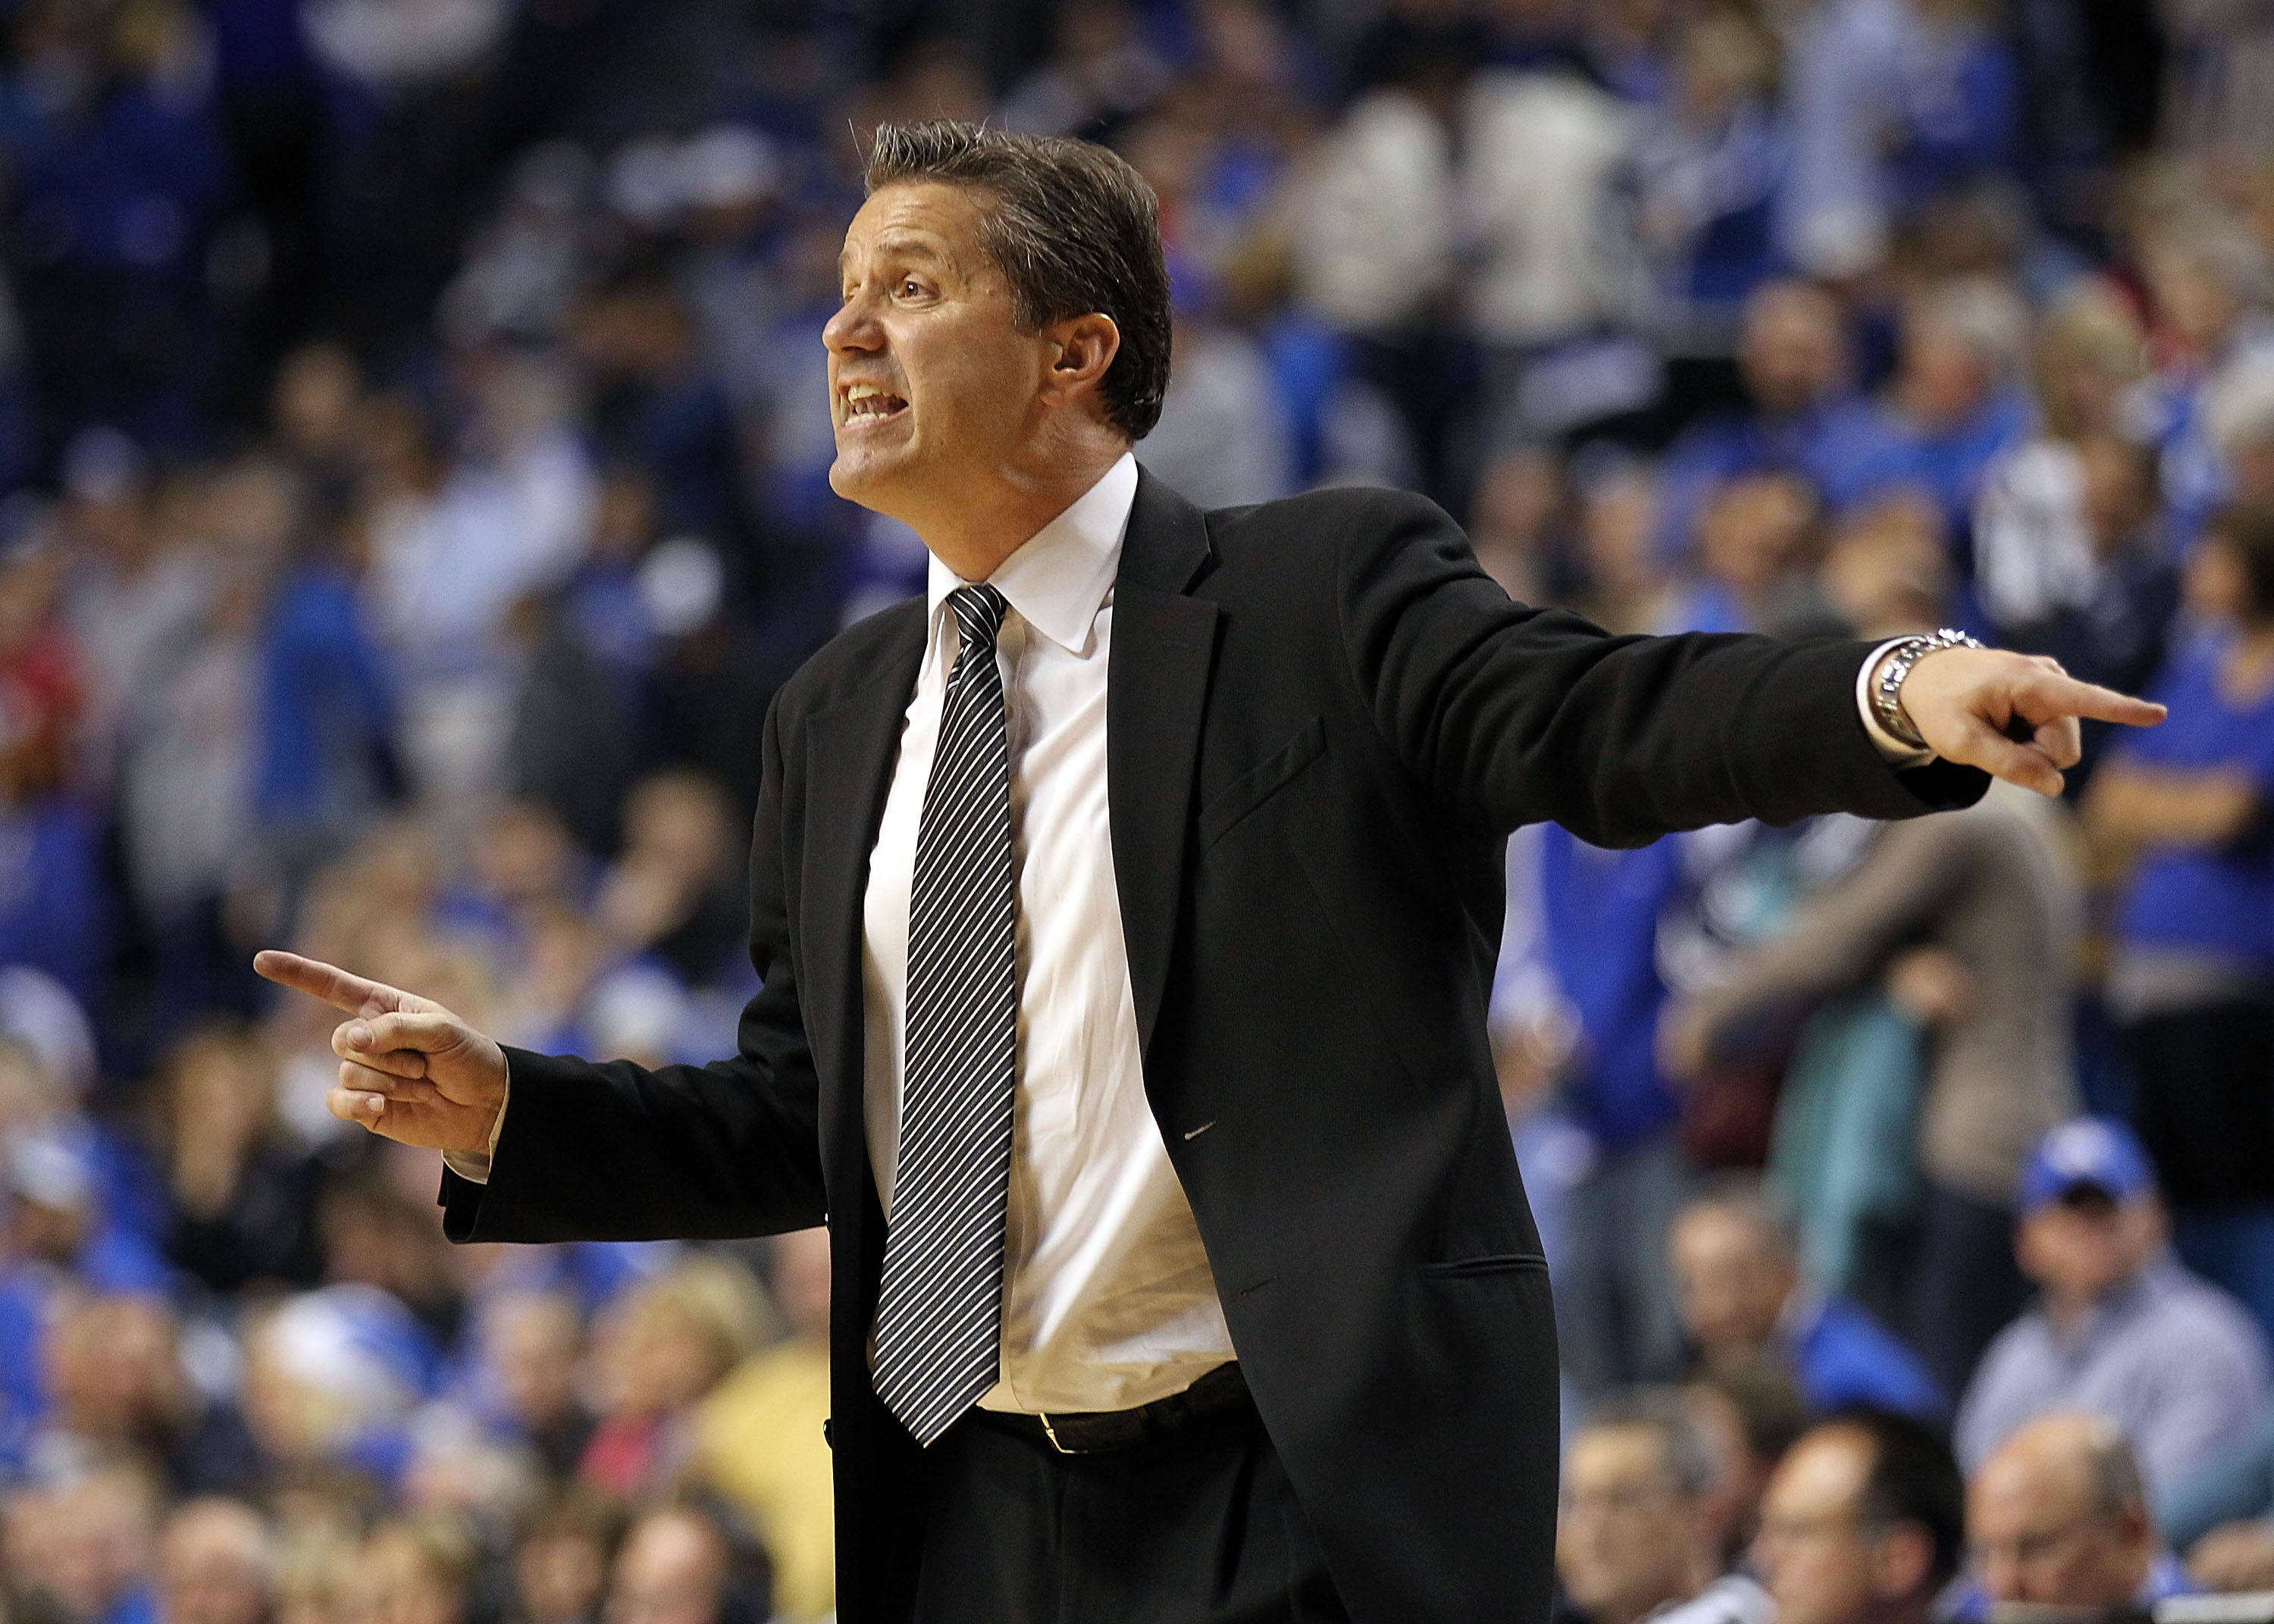 LEXINGTON, KY - DECEMBER 11:  John Calipari the Head Coach of the Kentucky Wildcats gives instructions to his team during the 81-62 victory over the Indiana Hoosiers on December 11, 2010 in Lexington, Kentucky.  (Photo by Andy Lyons/Getty Images)